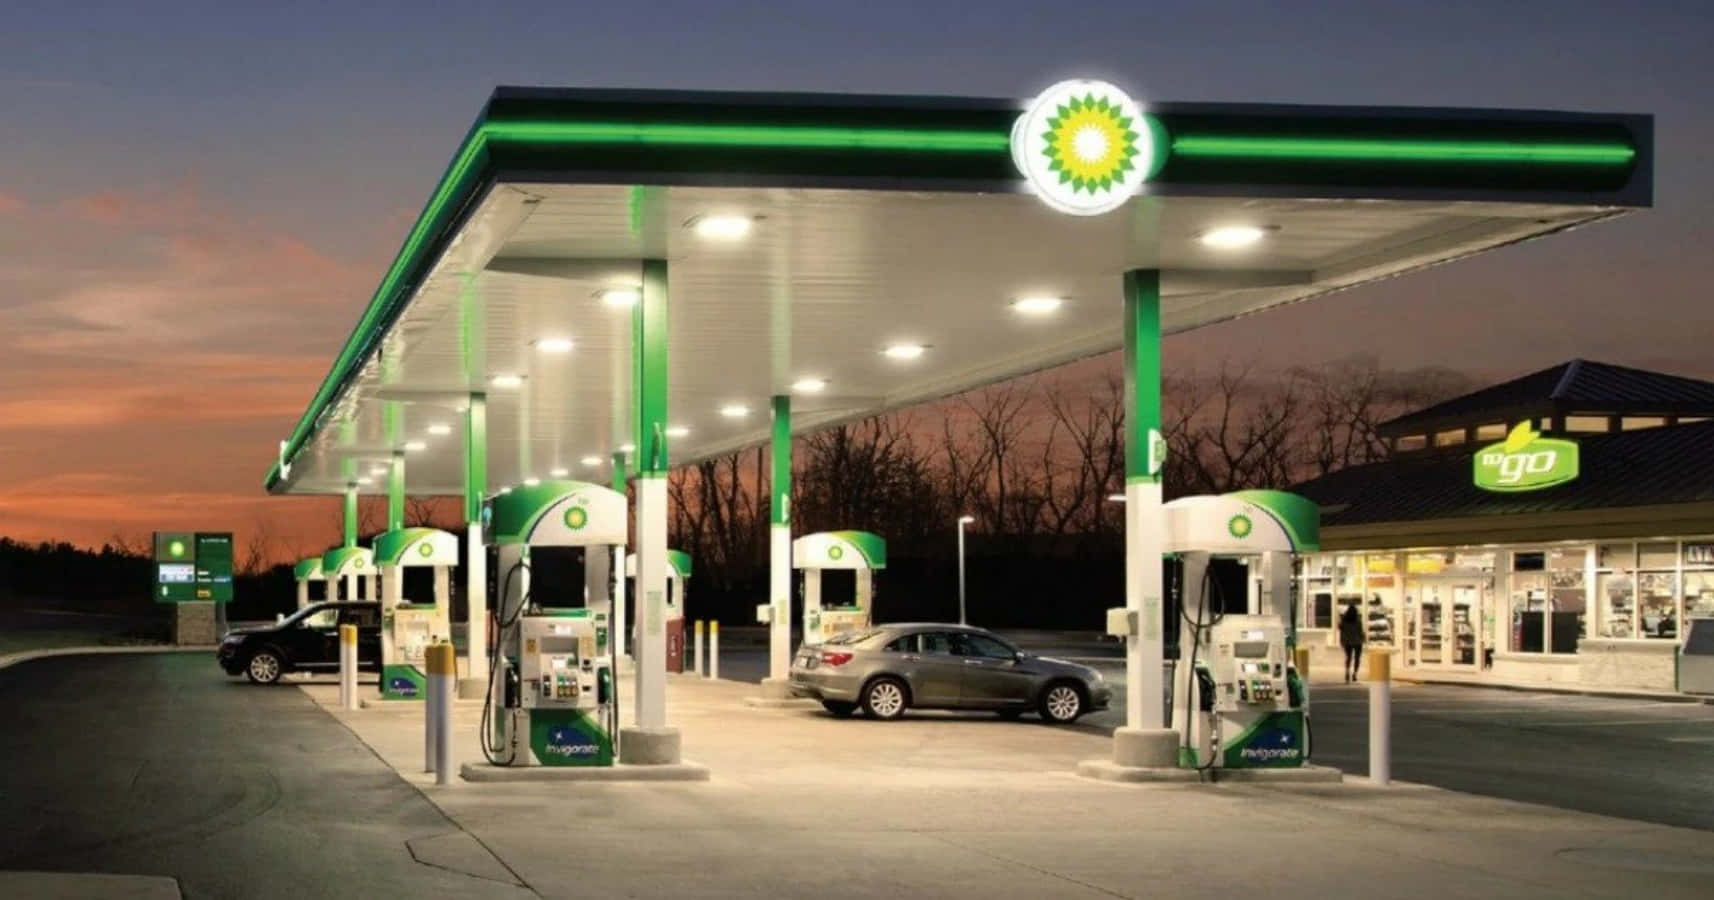 Refuel your car at this modern petrol station